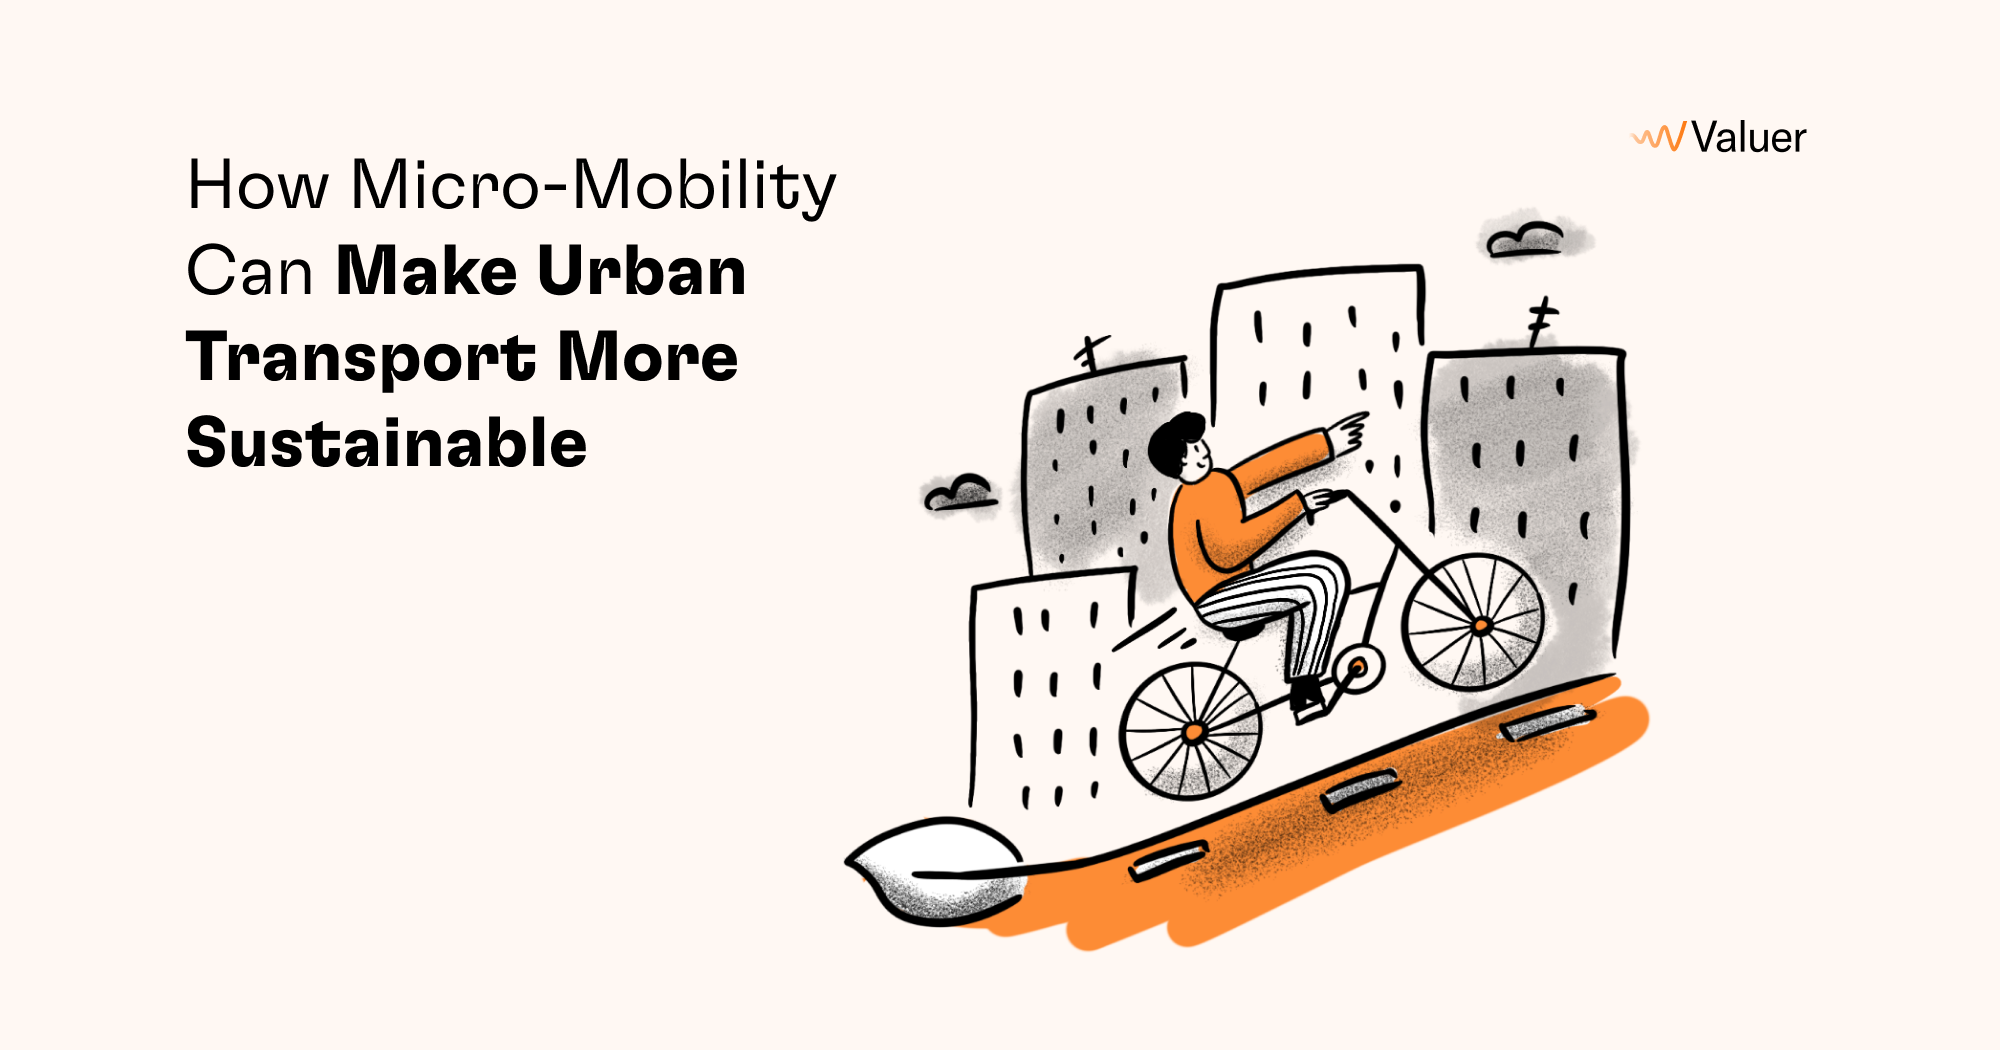 How Micro-Mobility Can Make Urban Transport More Sustainable